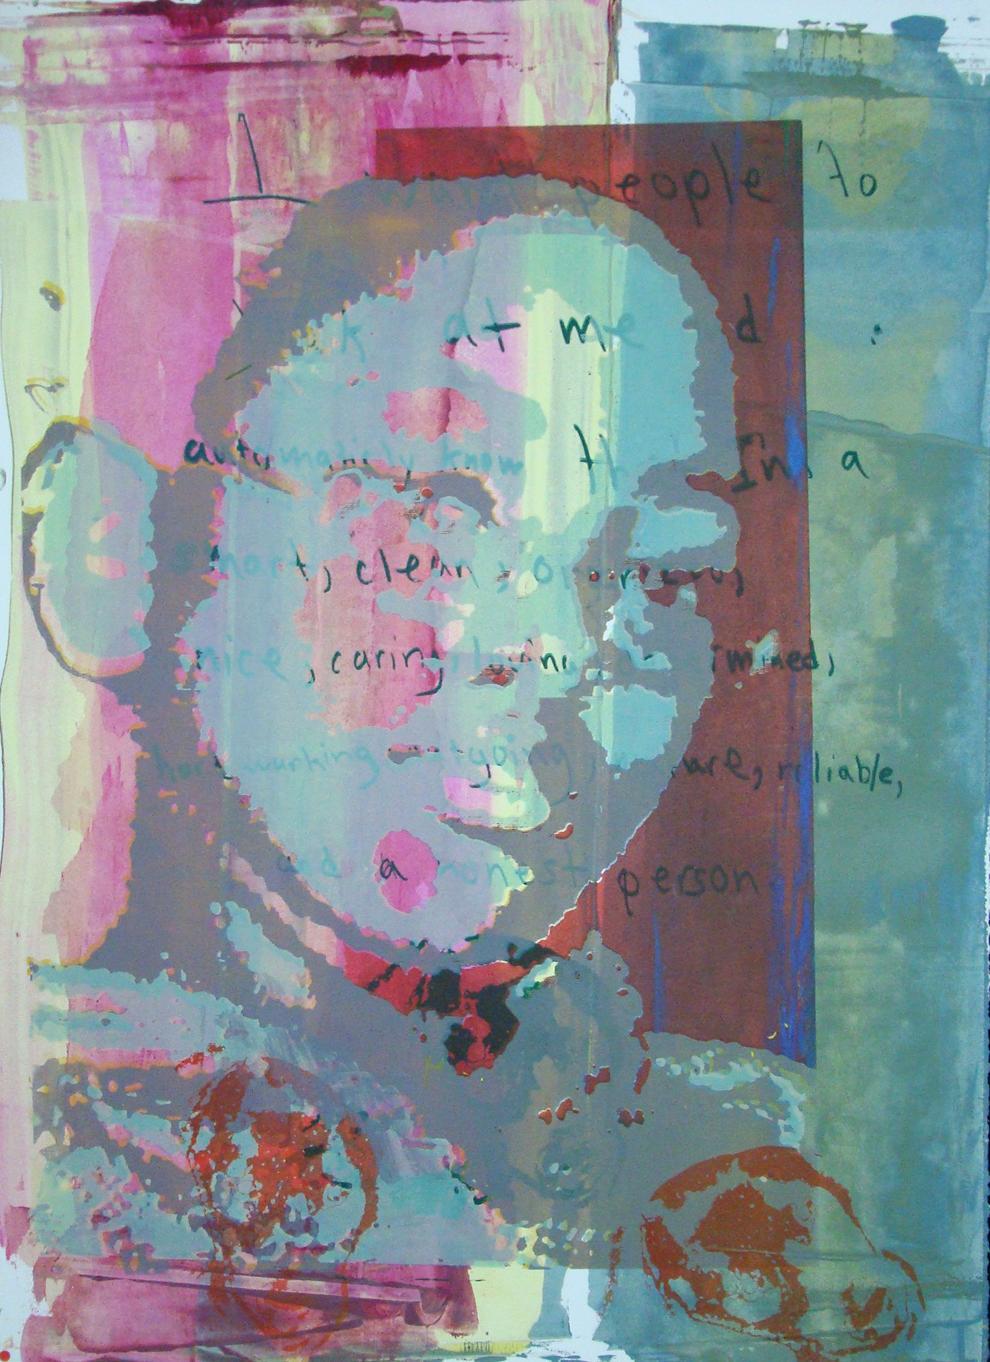 Tayler Morgan and Anne Brennan, Warm + Kewl, 2010, 30 x 22, paint and screenprint on paper. Vertically, Morgan squeegeed passages of warm colors moving into cool colors.